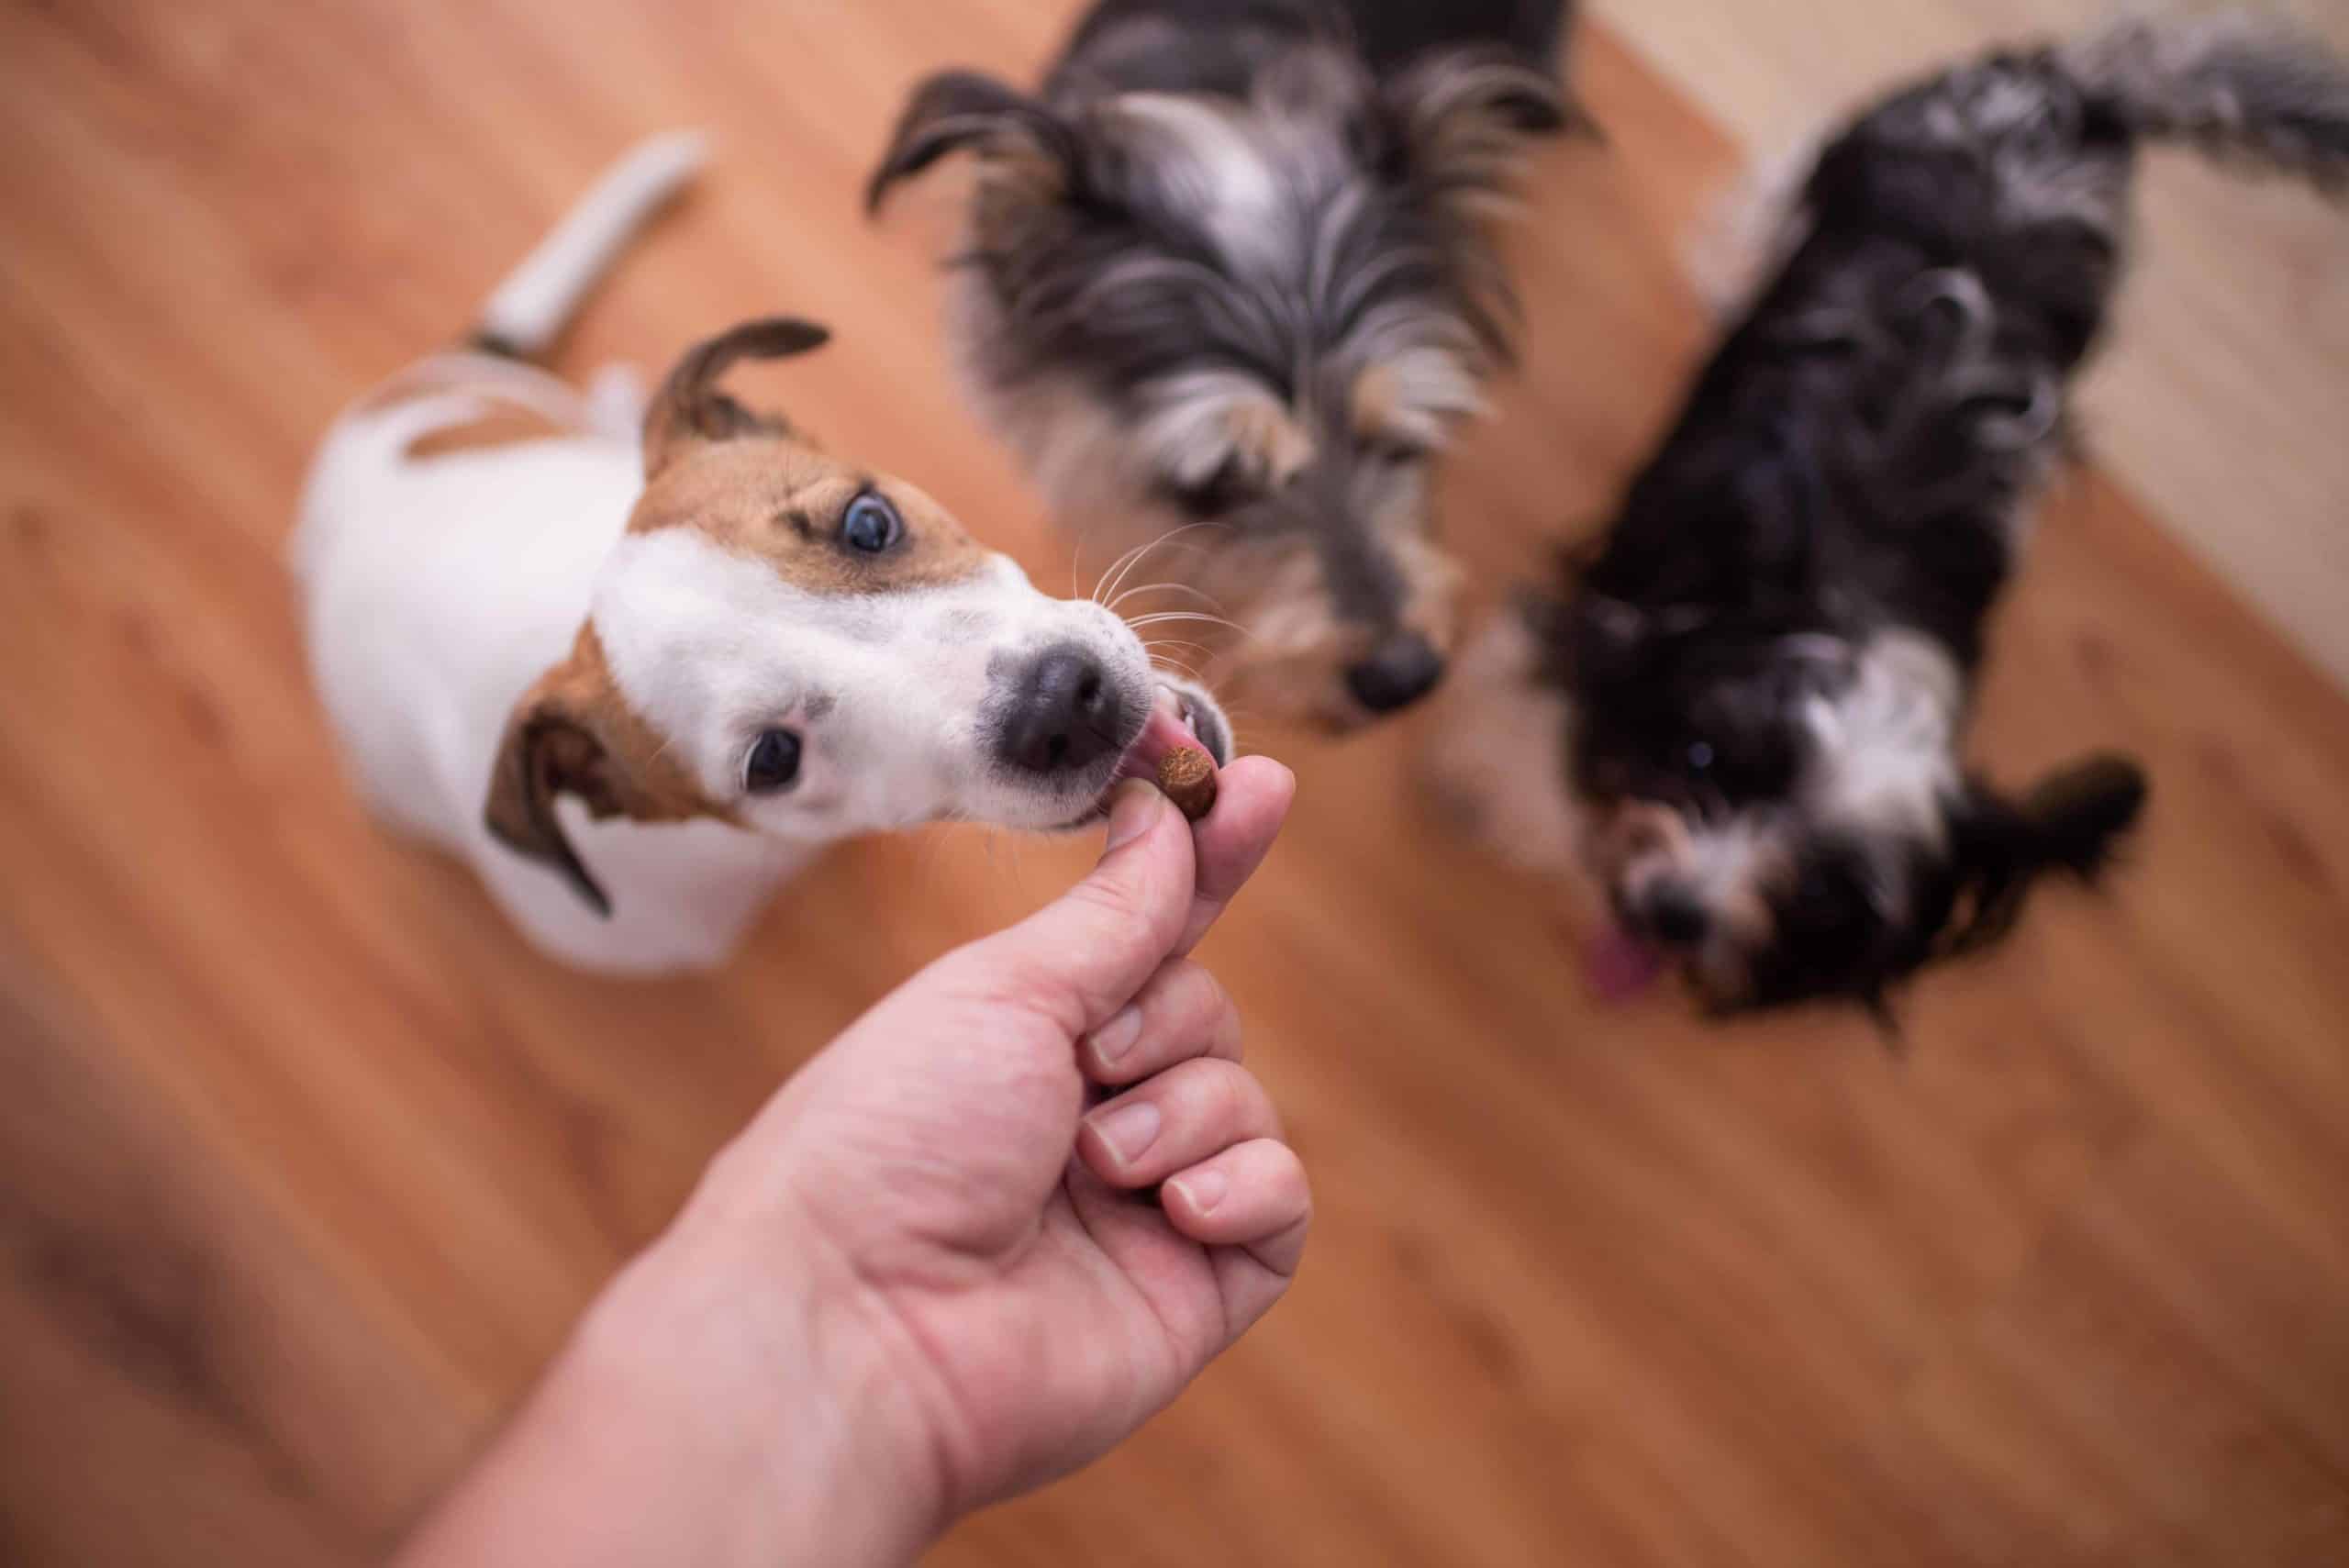 Owner works on training with three dogs. Living with three dogs or more has pros and cons. When making this choice, determine if you can afford and properly care for multiple pets.